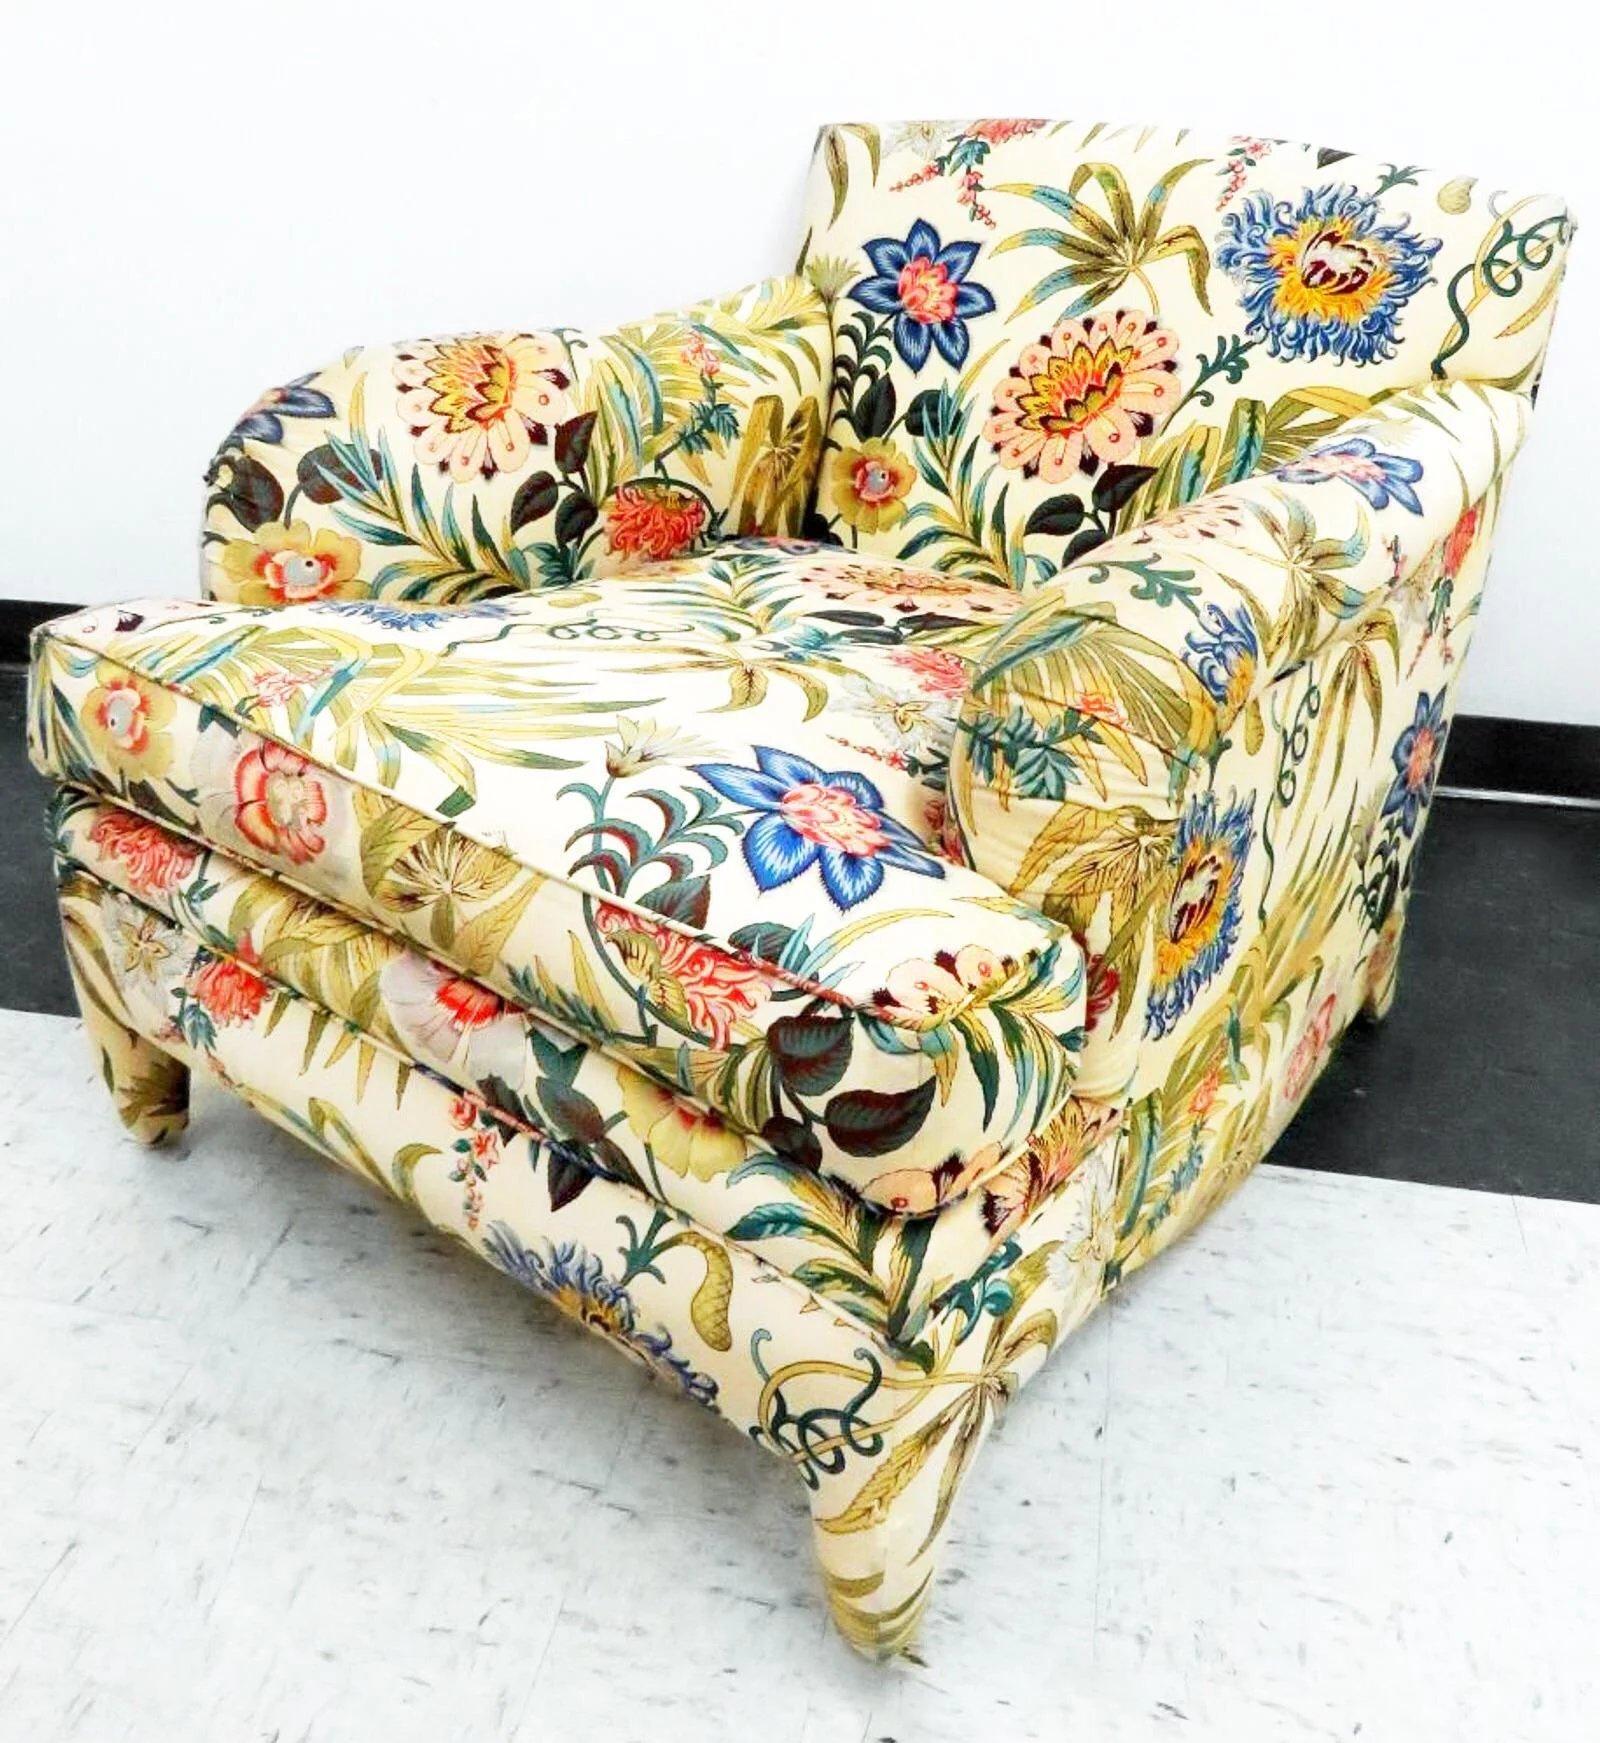 Gorgeous chair with long, languid lines and a wonderfully colorful yet elegant Jacobean textile. I very much enjoy the upholstered legs on his piece, gives it a sculptural, yet fluid feel.

Dimensions35ʺW × 35ʺD × 32ʺH

Good vintage condition. Age